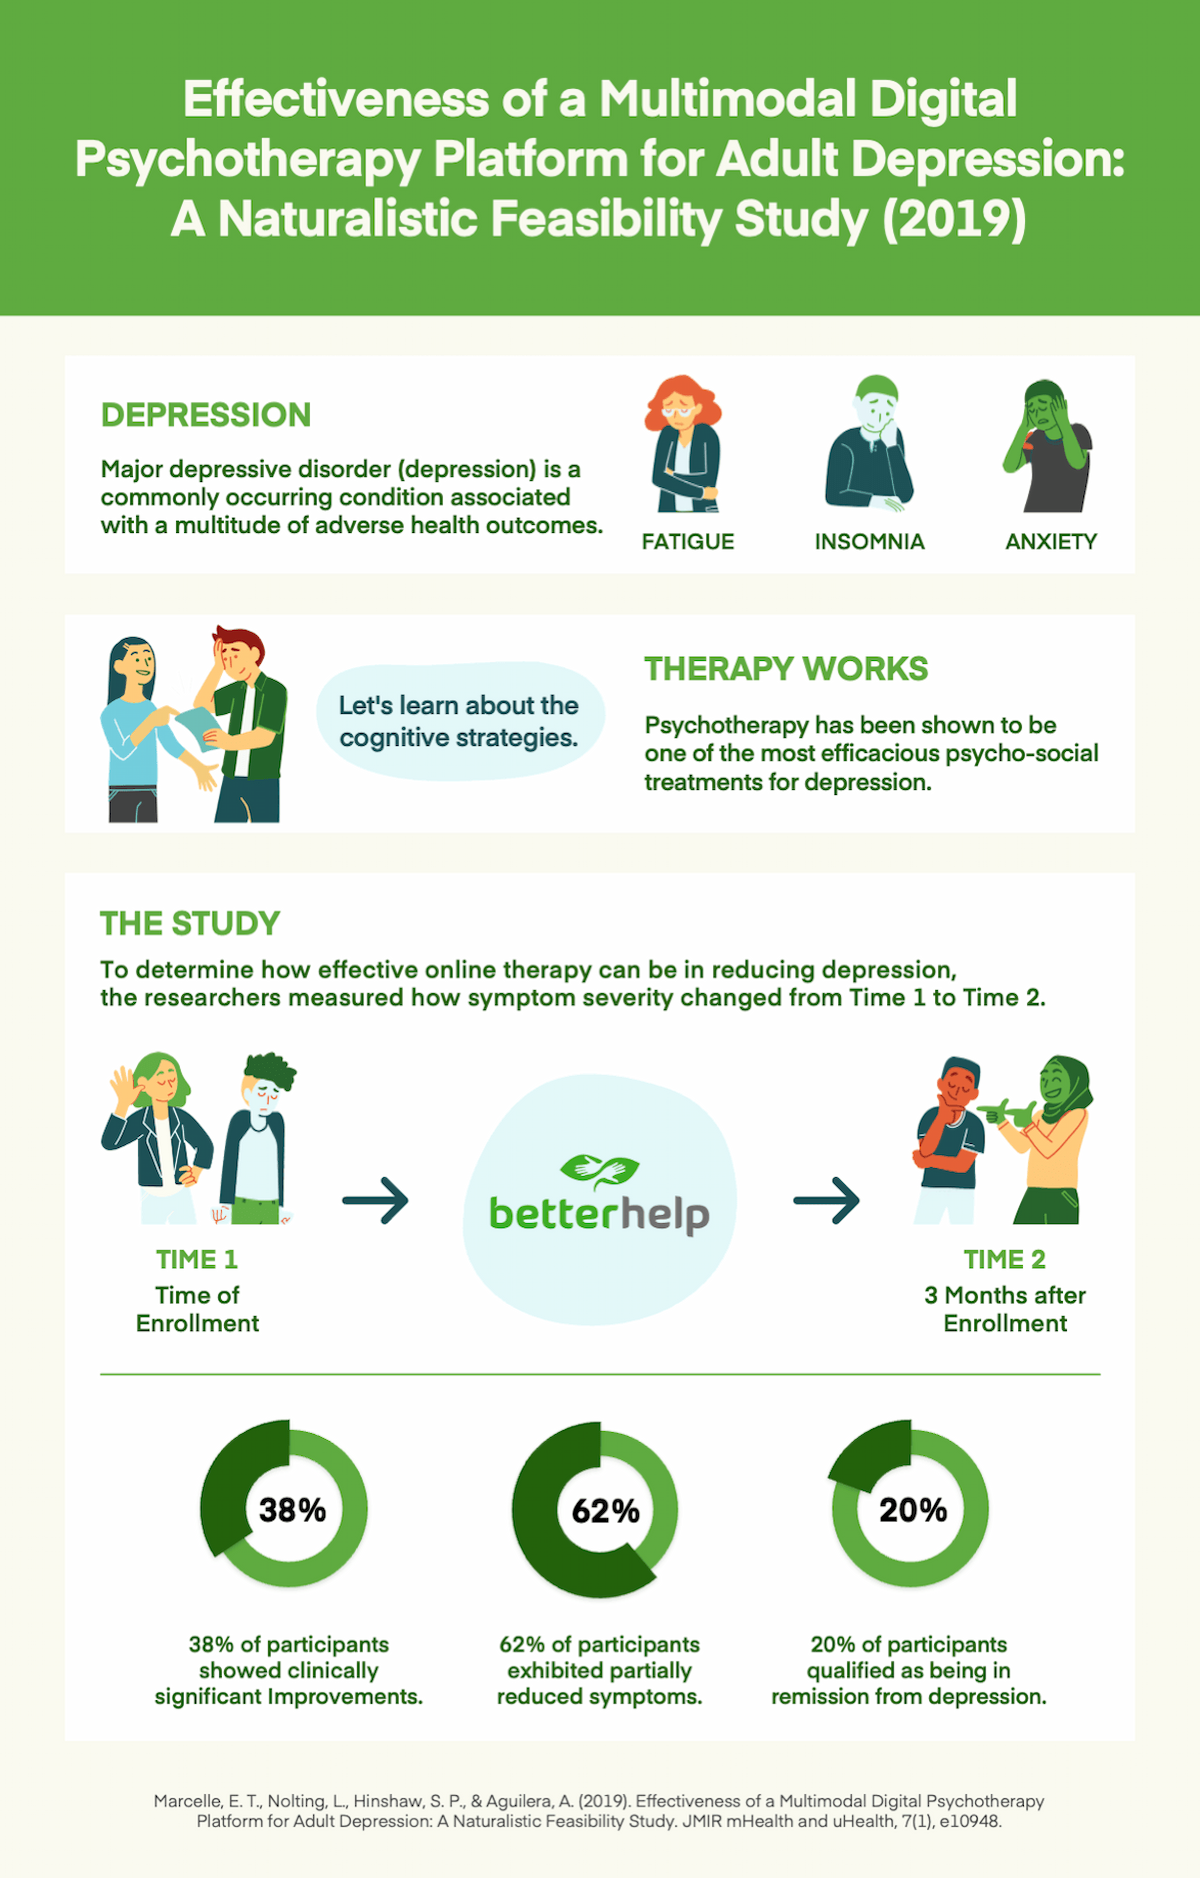 15 Jobs For People With Depression | BetterHelp